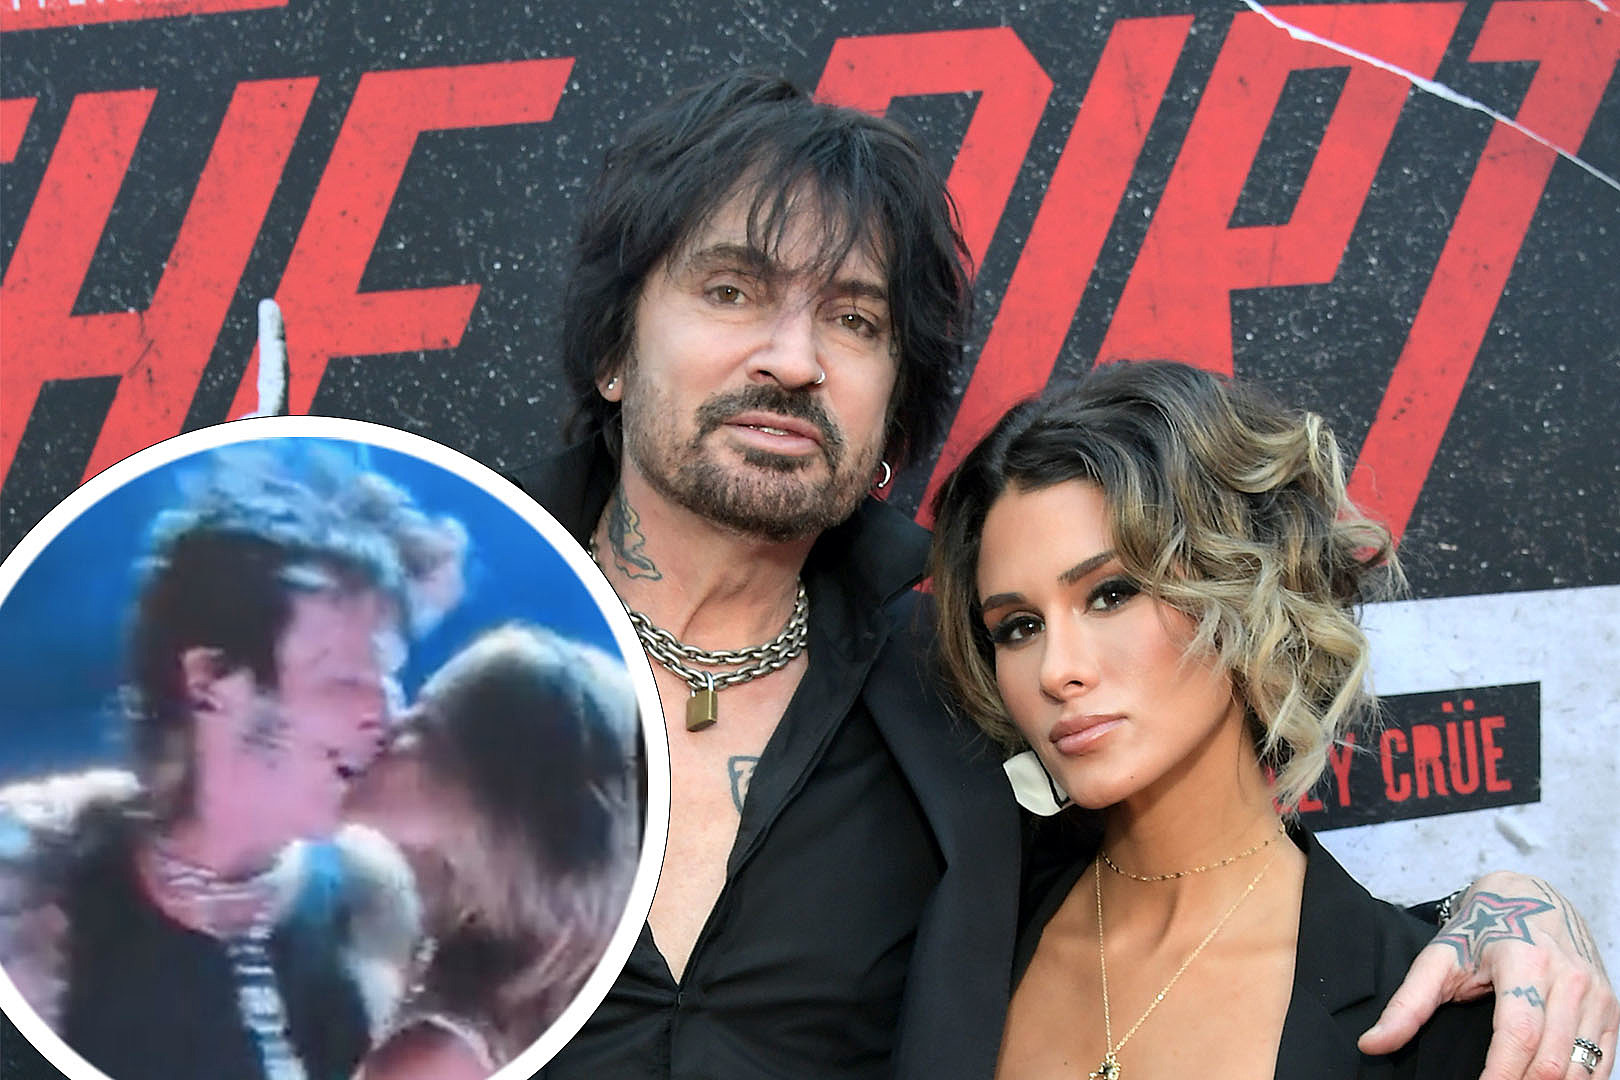 Tommy Lee Brings Wife Brittany Furlan Onstage to Flash Crowd image picture image